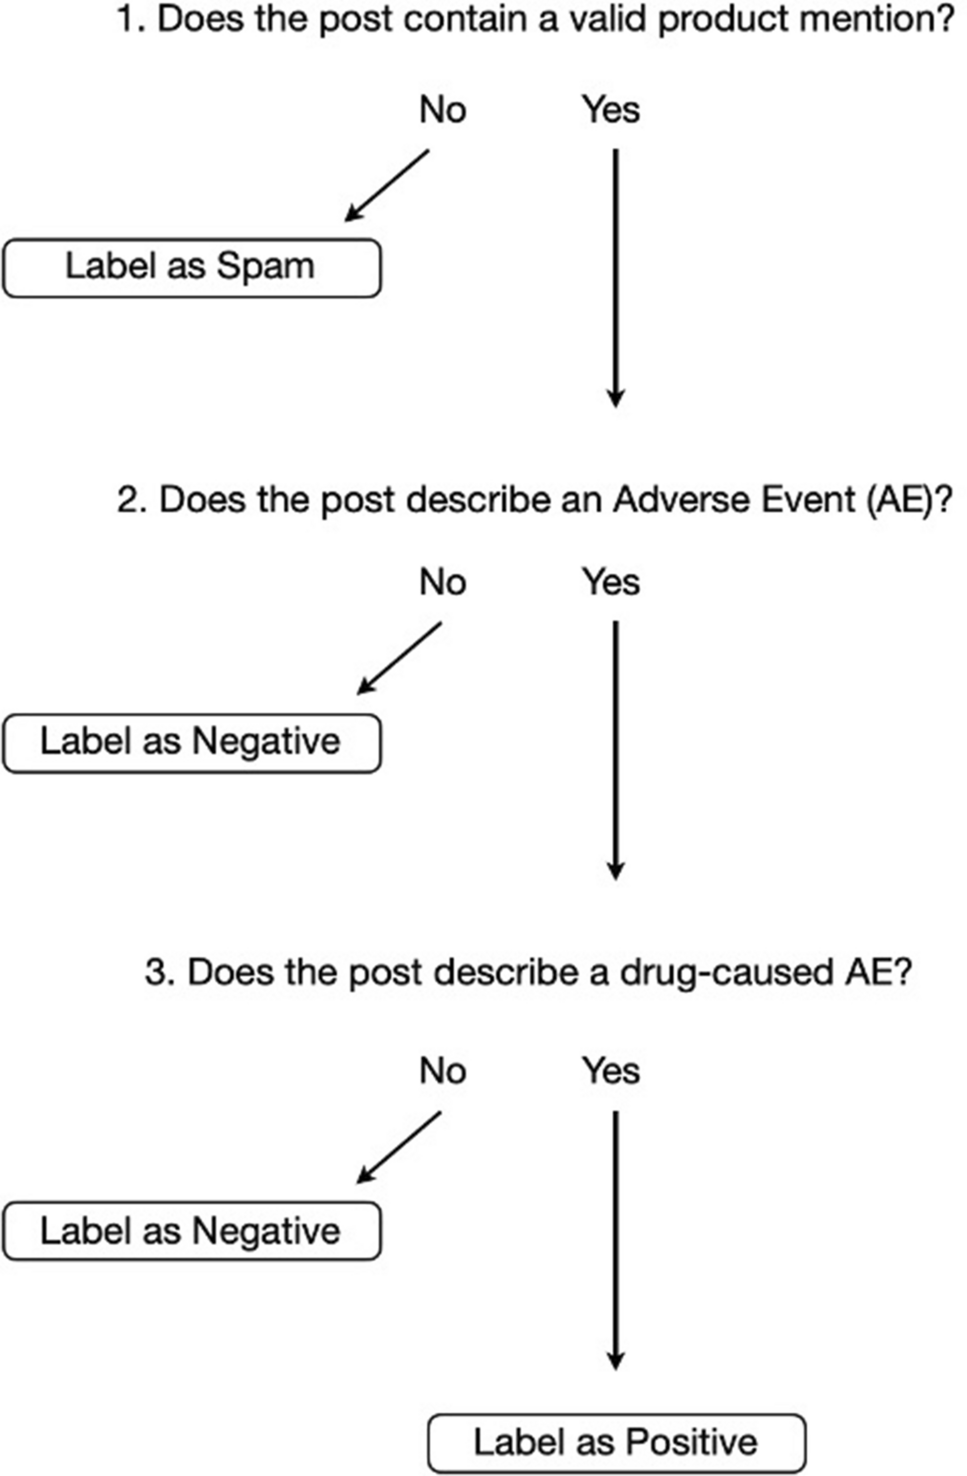 Using Social Media as a Source of Real-World Data for Pharmaceutical Drug Development and Regulatory Decision Making